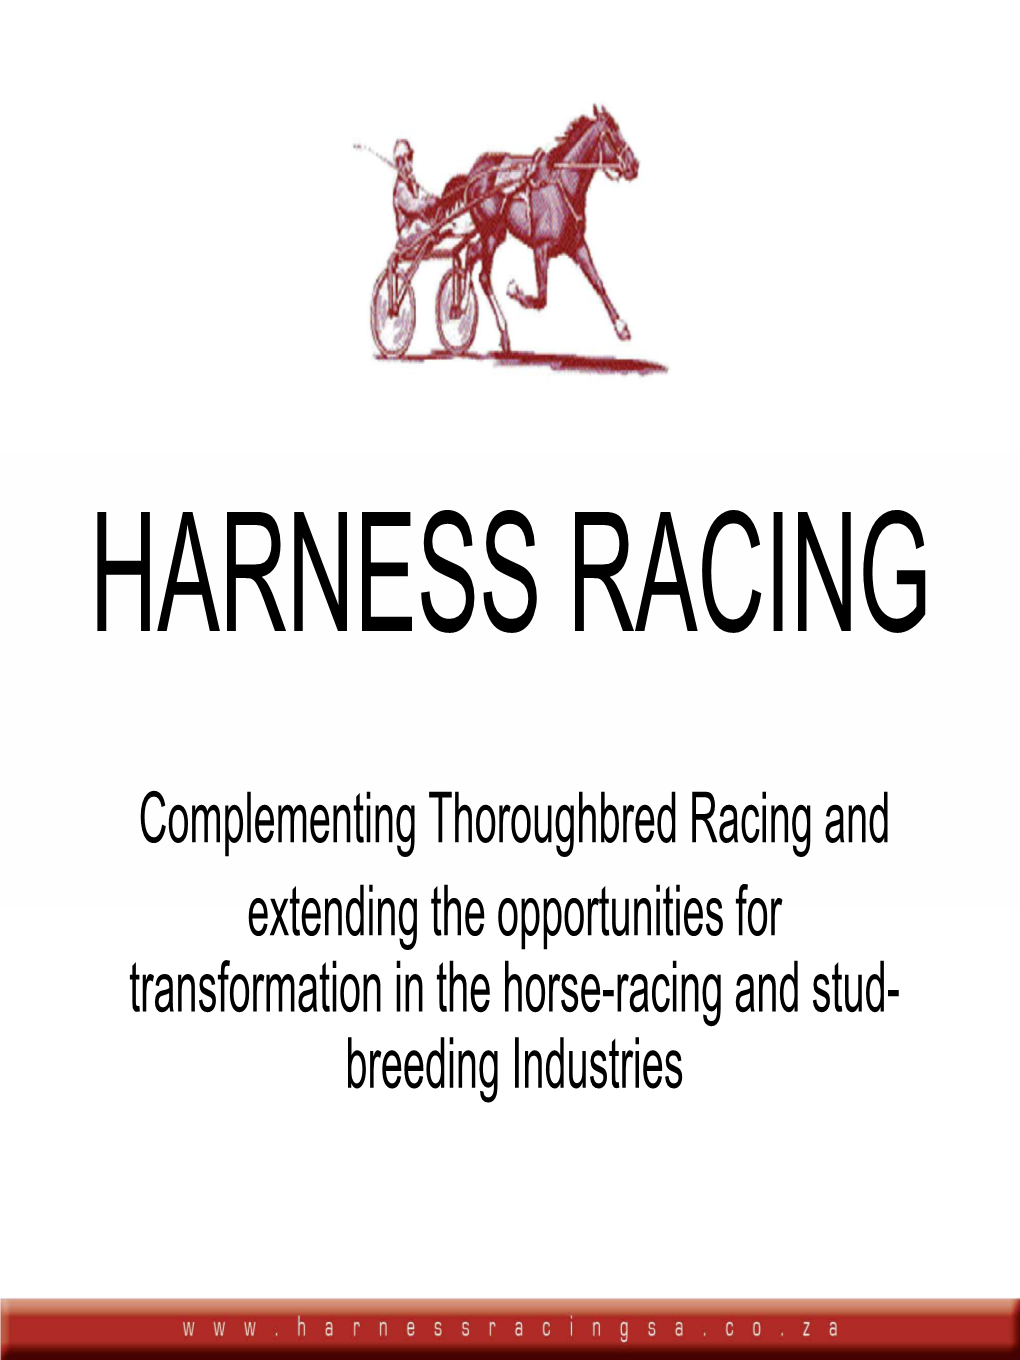 Harness Racing Submission